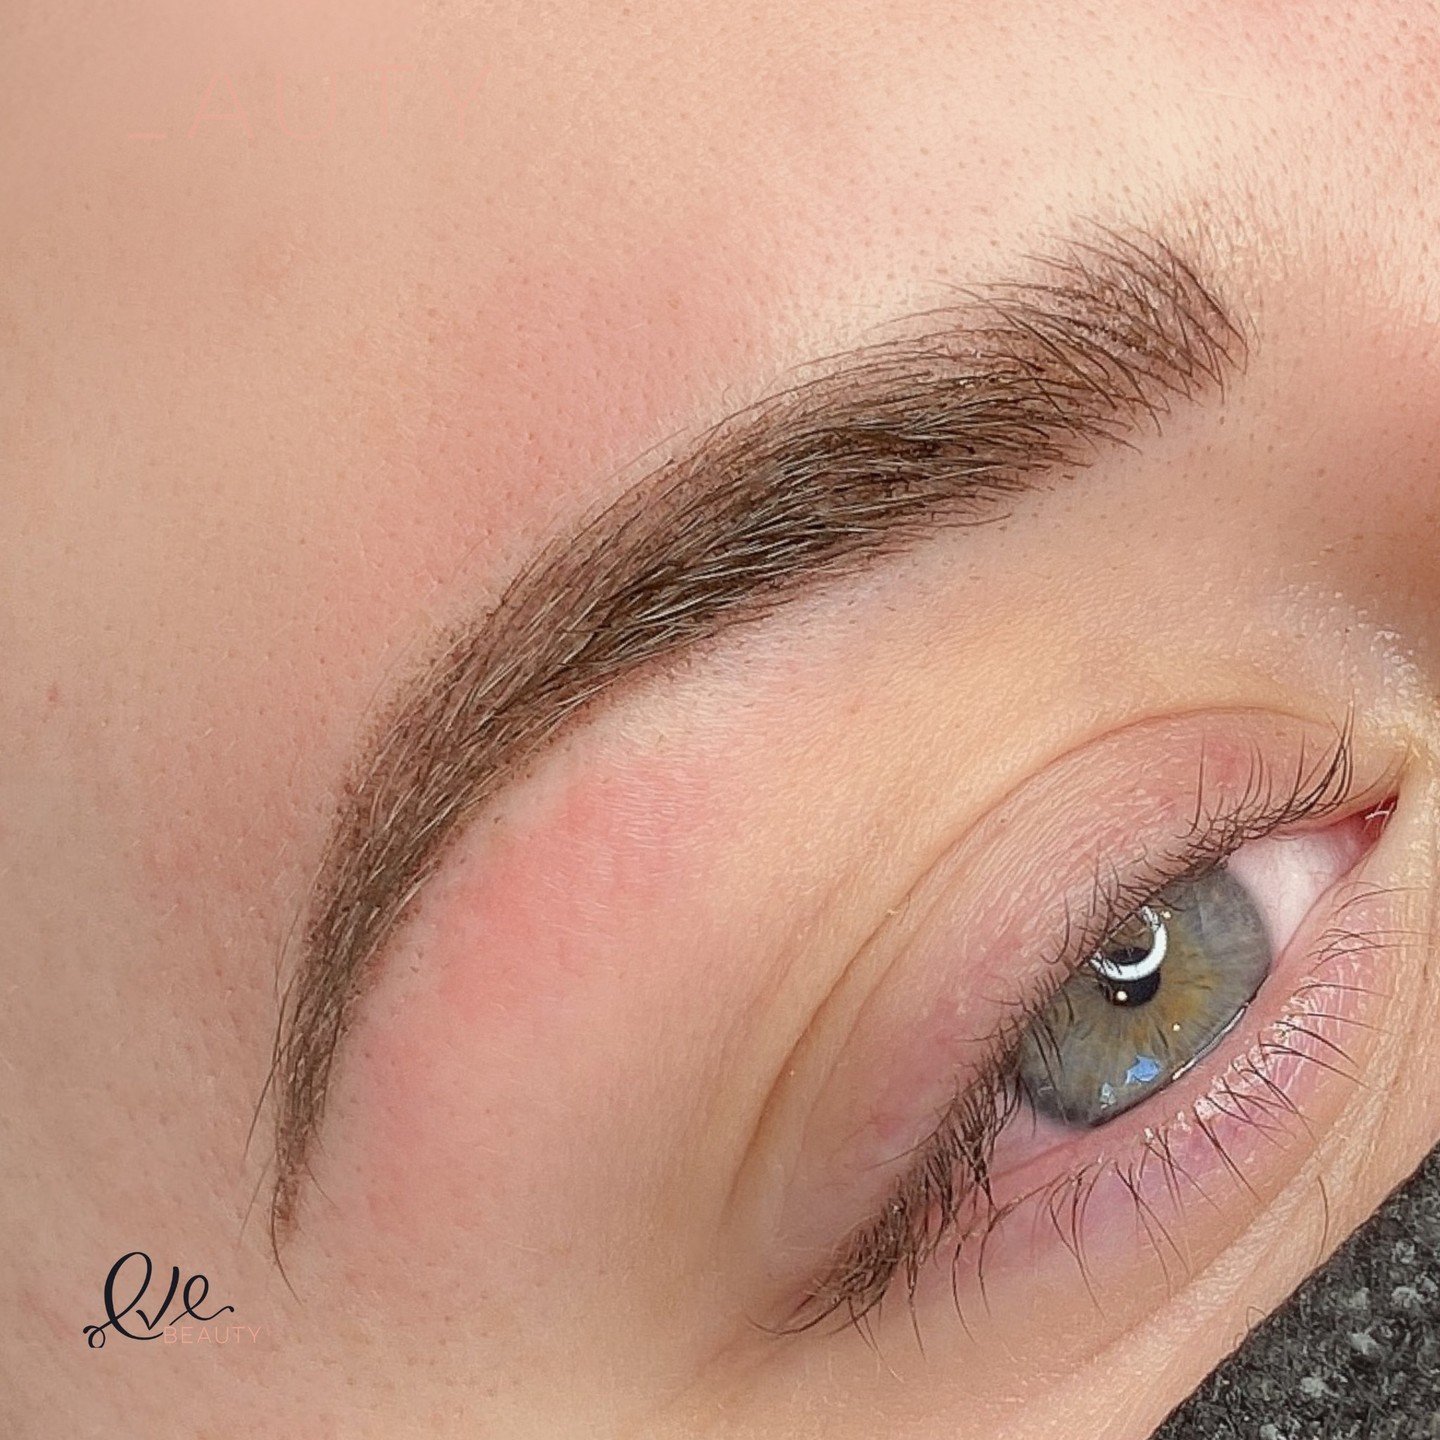 Combination Brow HEAVEN with @bostonblushandbrows ☁️ 😇 

Eve Beauty provides the most natural and gorgeous looking pmu brows. After hundreds of happy clients, years of experience, and extensive training on the latest and greatest services, we are co